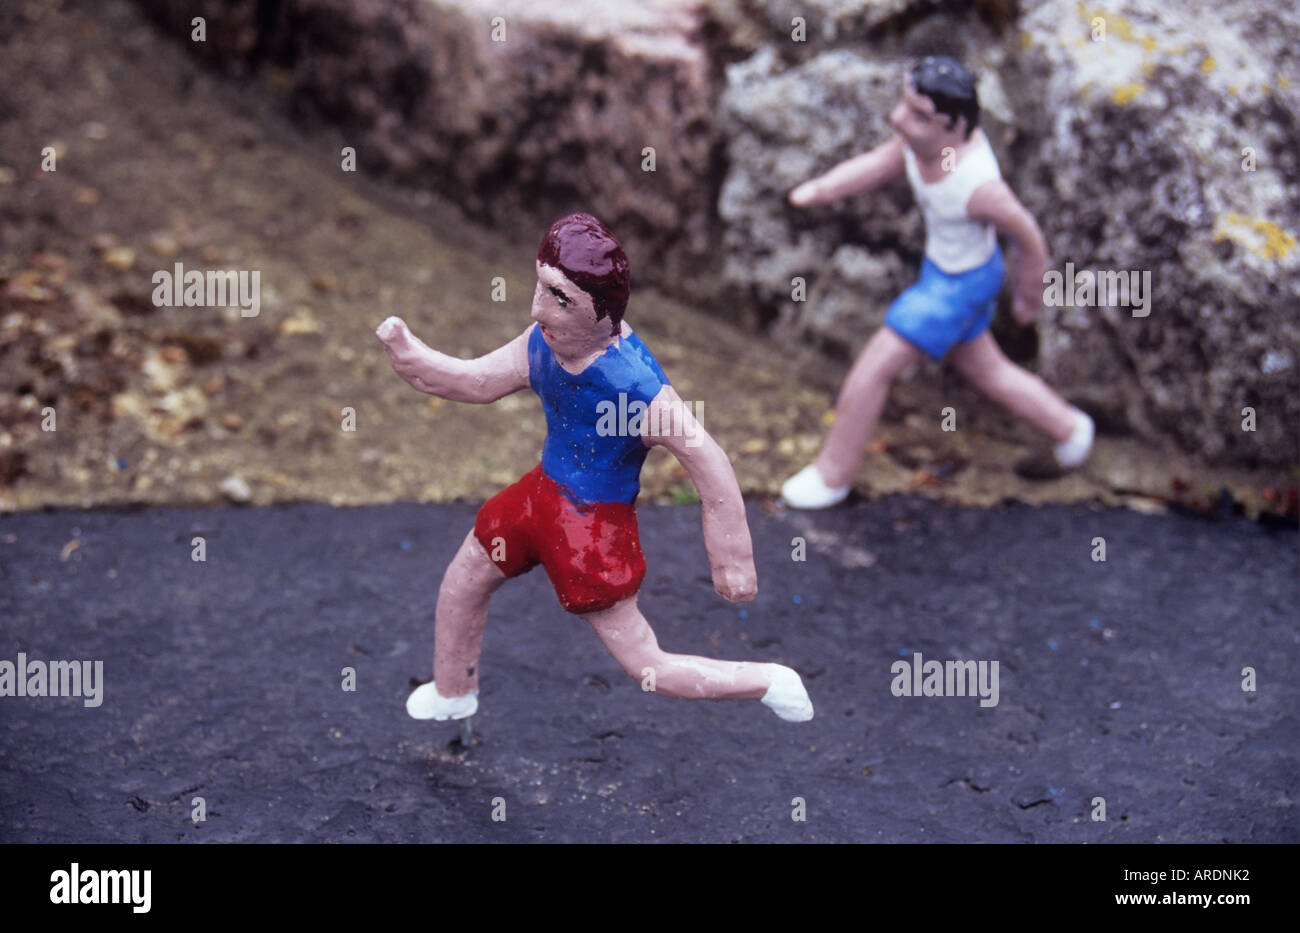 Two naively fashioned clay models painted in running gear striding out on miniature road past some rocks Stock Photo